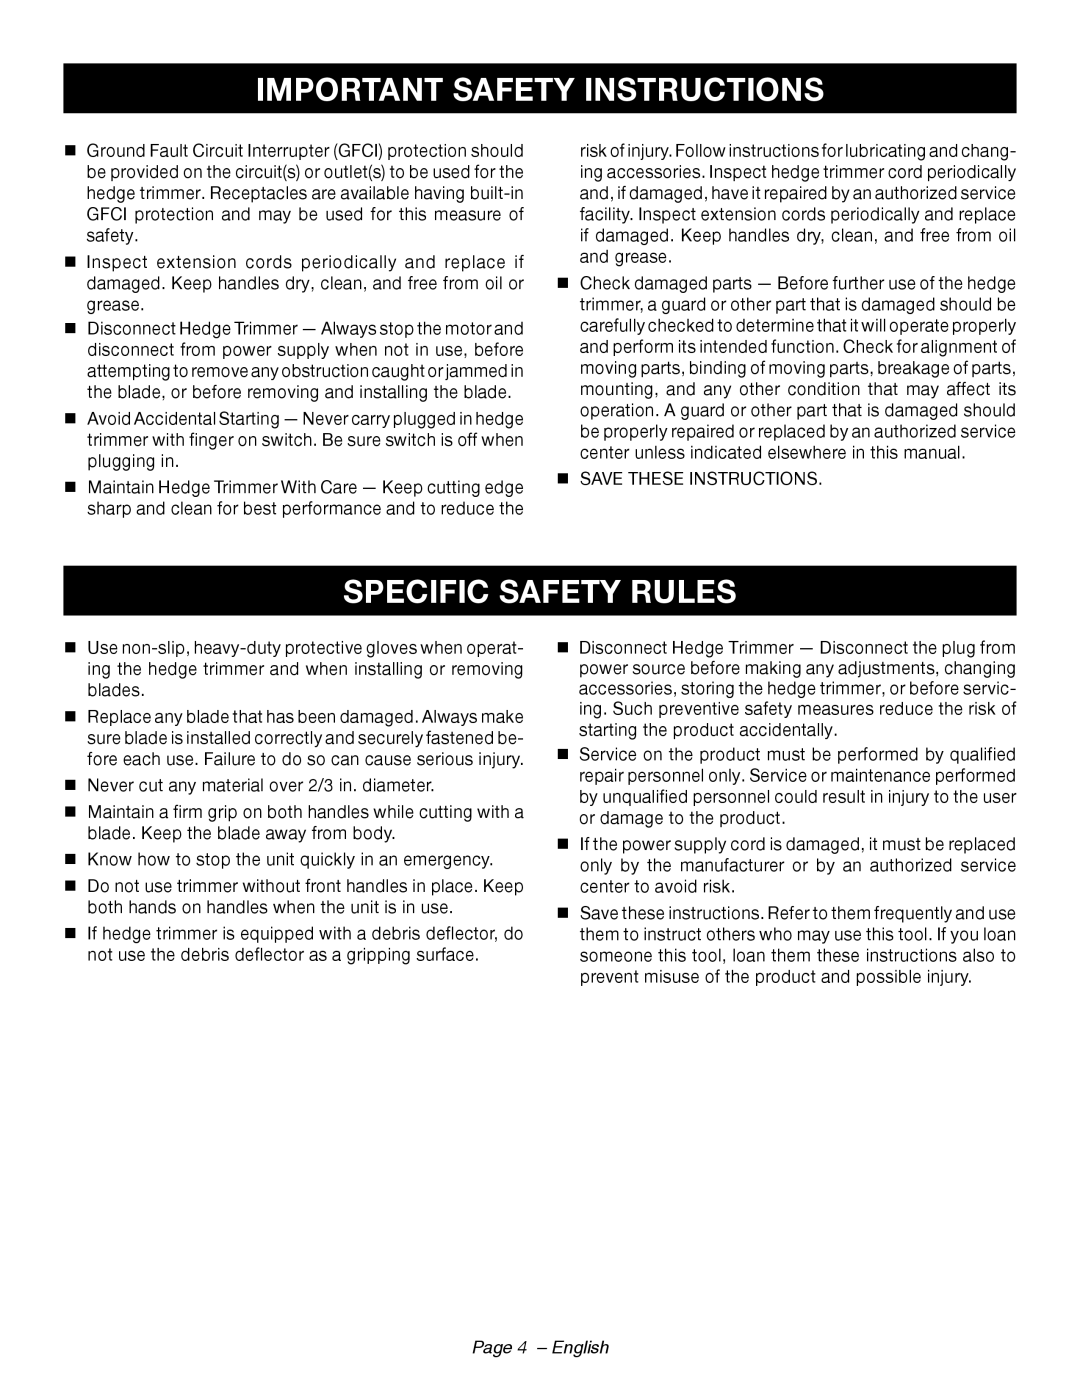 Ryobi RY44140 manuel dutilisation Specific Safety Rules, Page 4 - English, Important Safety Instructions 